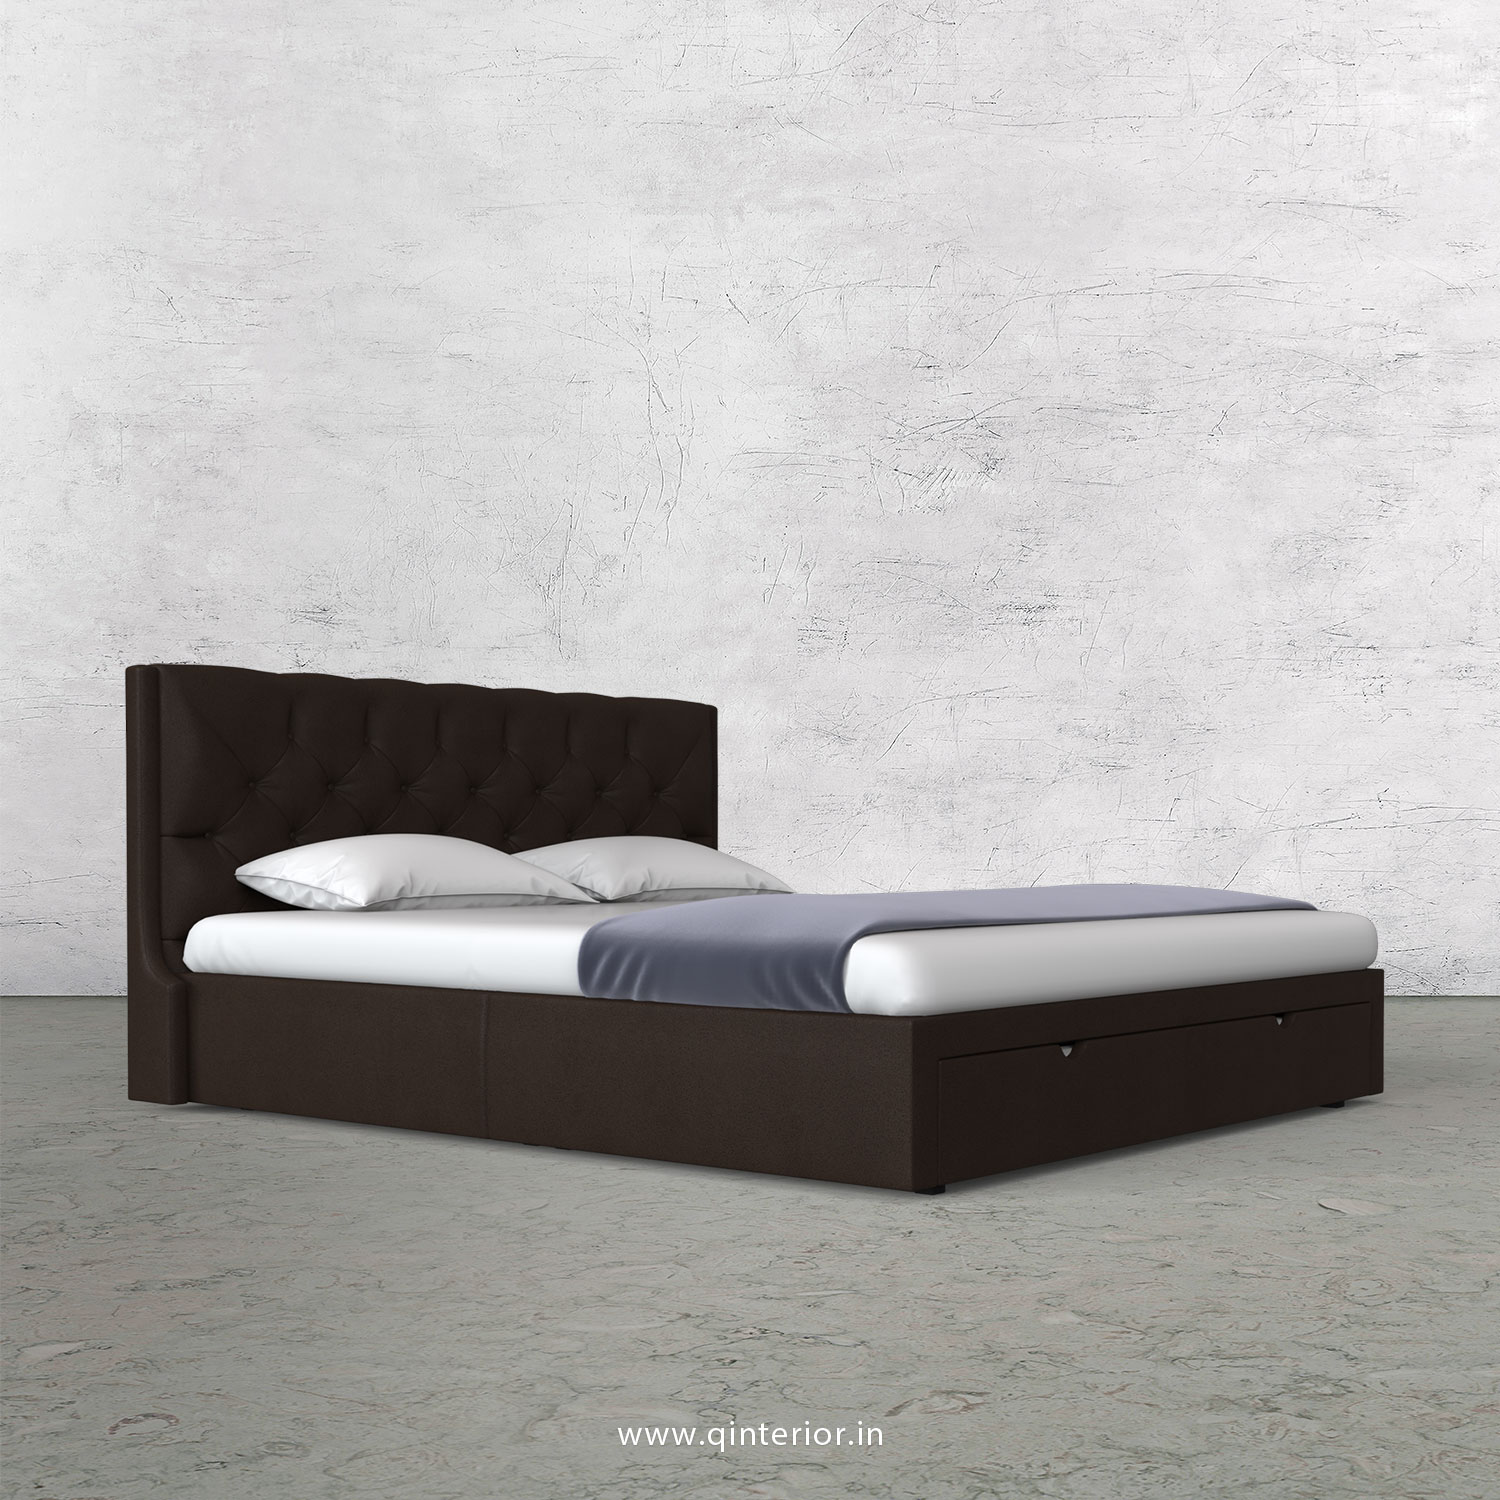 Scorpius King Size Storage Bed in Fab Leather Fabric - KBD001 FL16